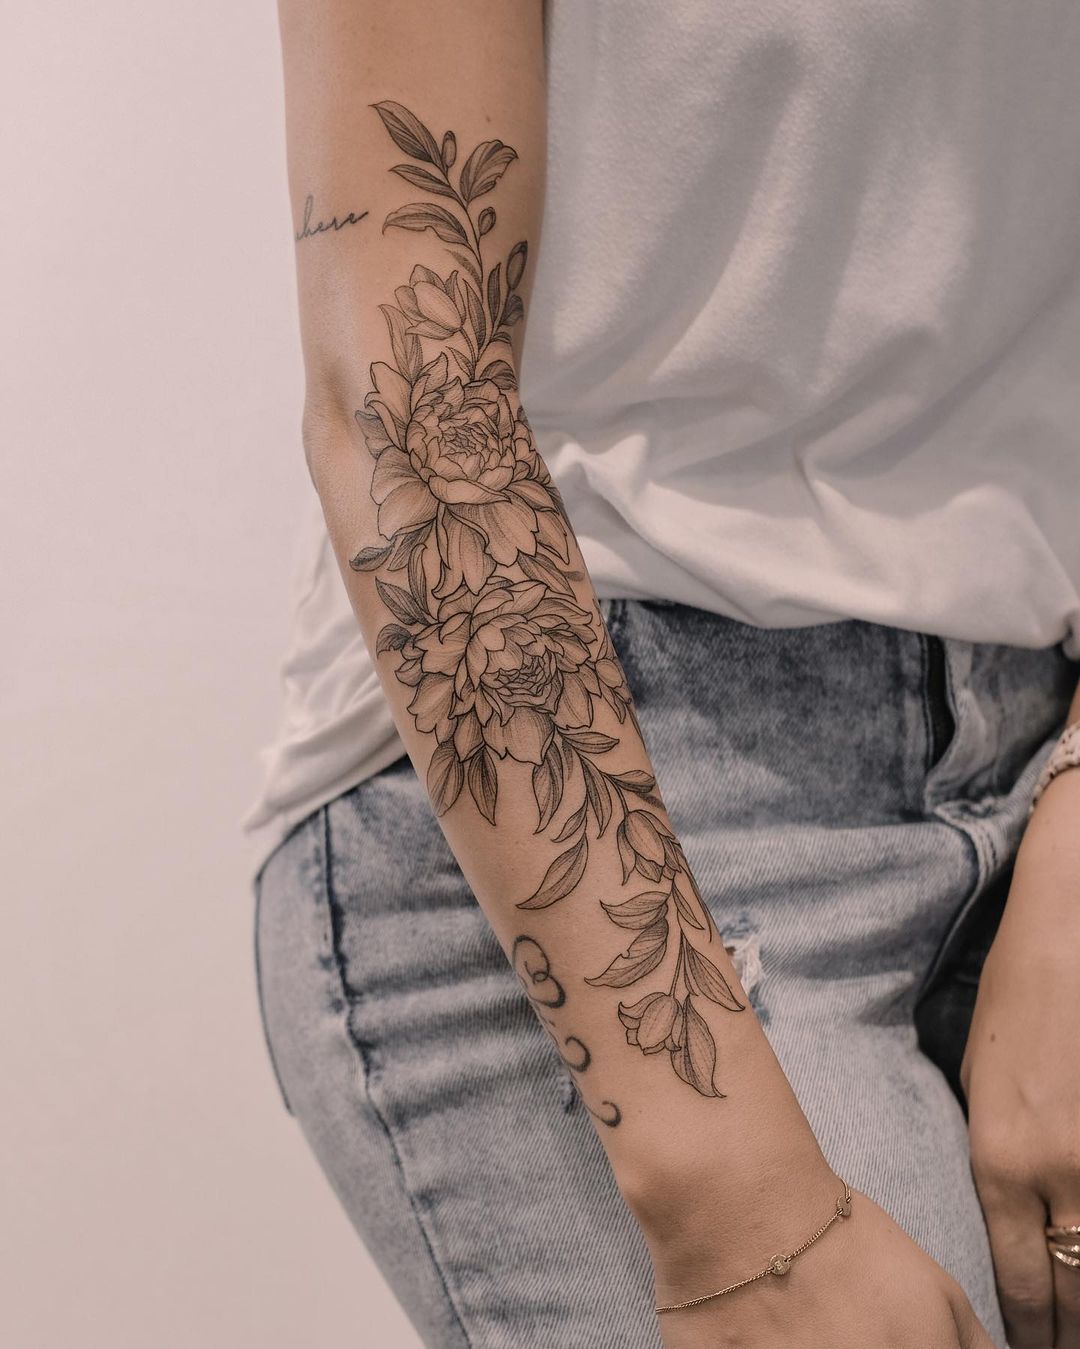 Delicate flower tattoos for girls by Roman Itchev | iNKPPL